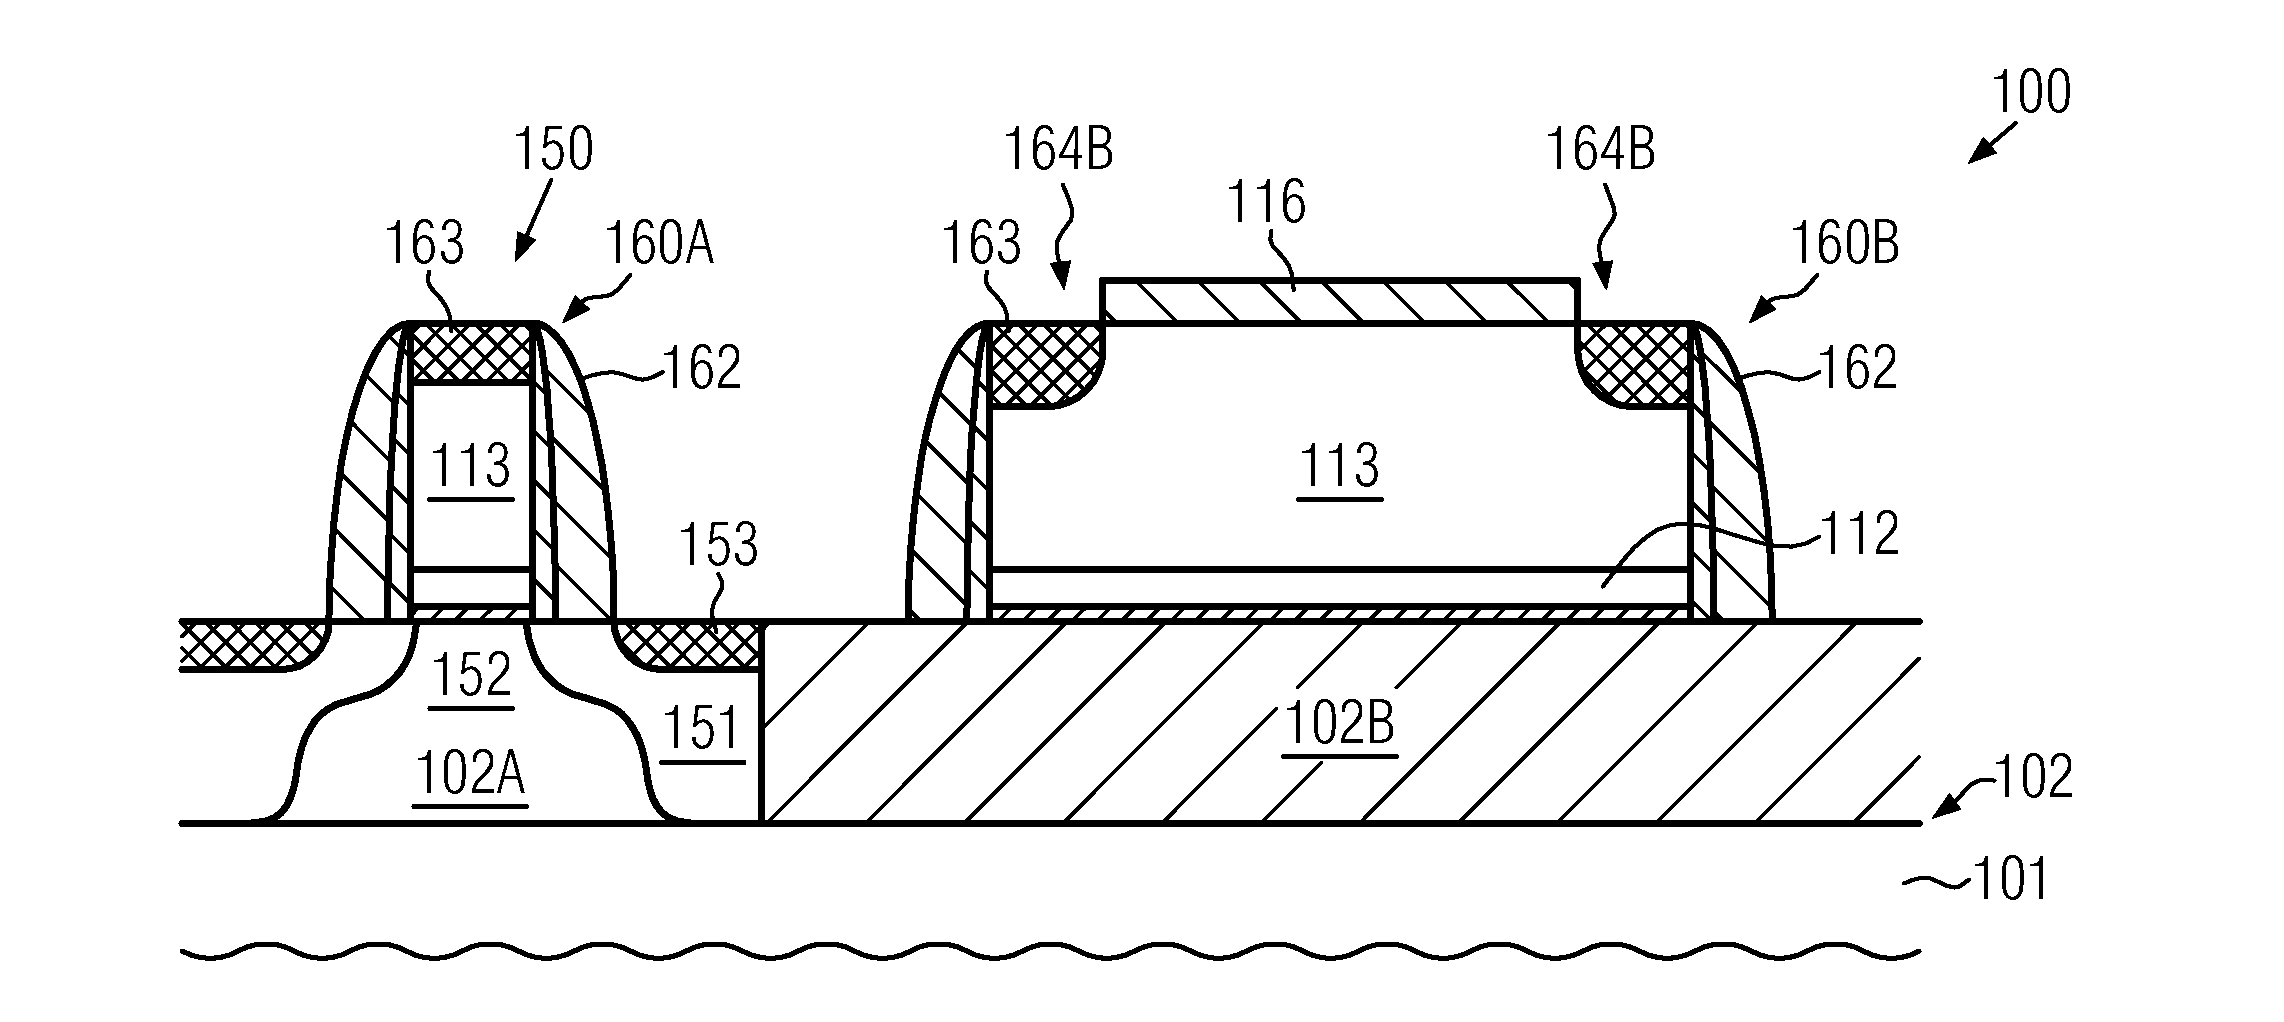 Polysilicon Resistors Formed in a Semiconductor Device Comprising High-K Metal Gate Electrode Structures